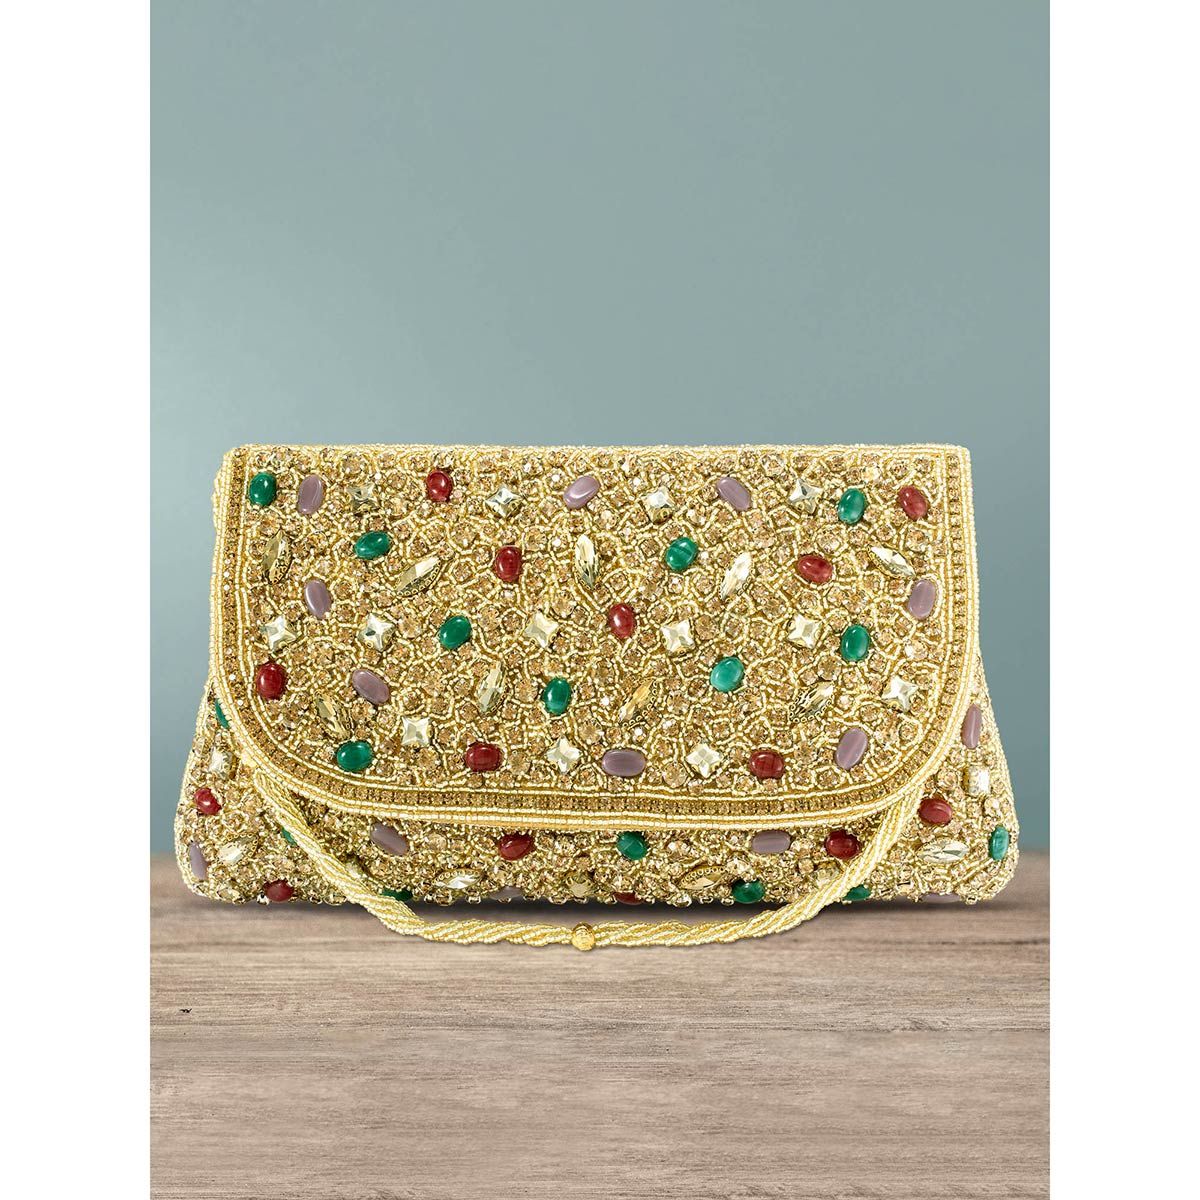 Buy Multi Color Embroidered Clutch Online - RK India Store View